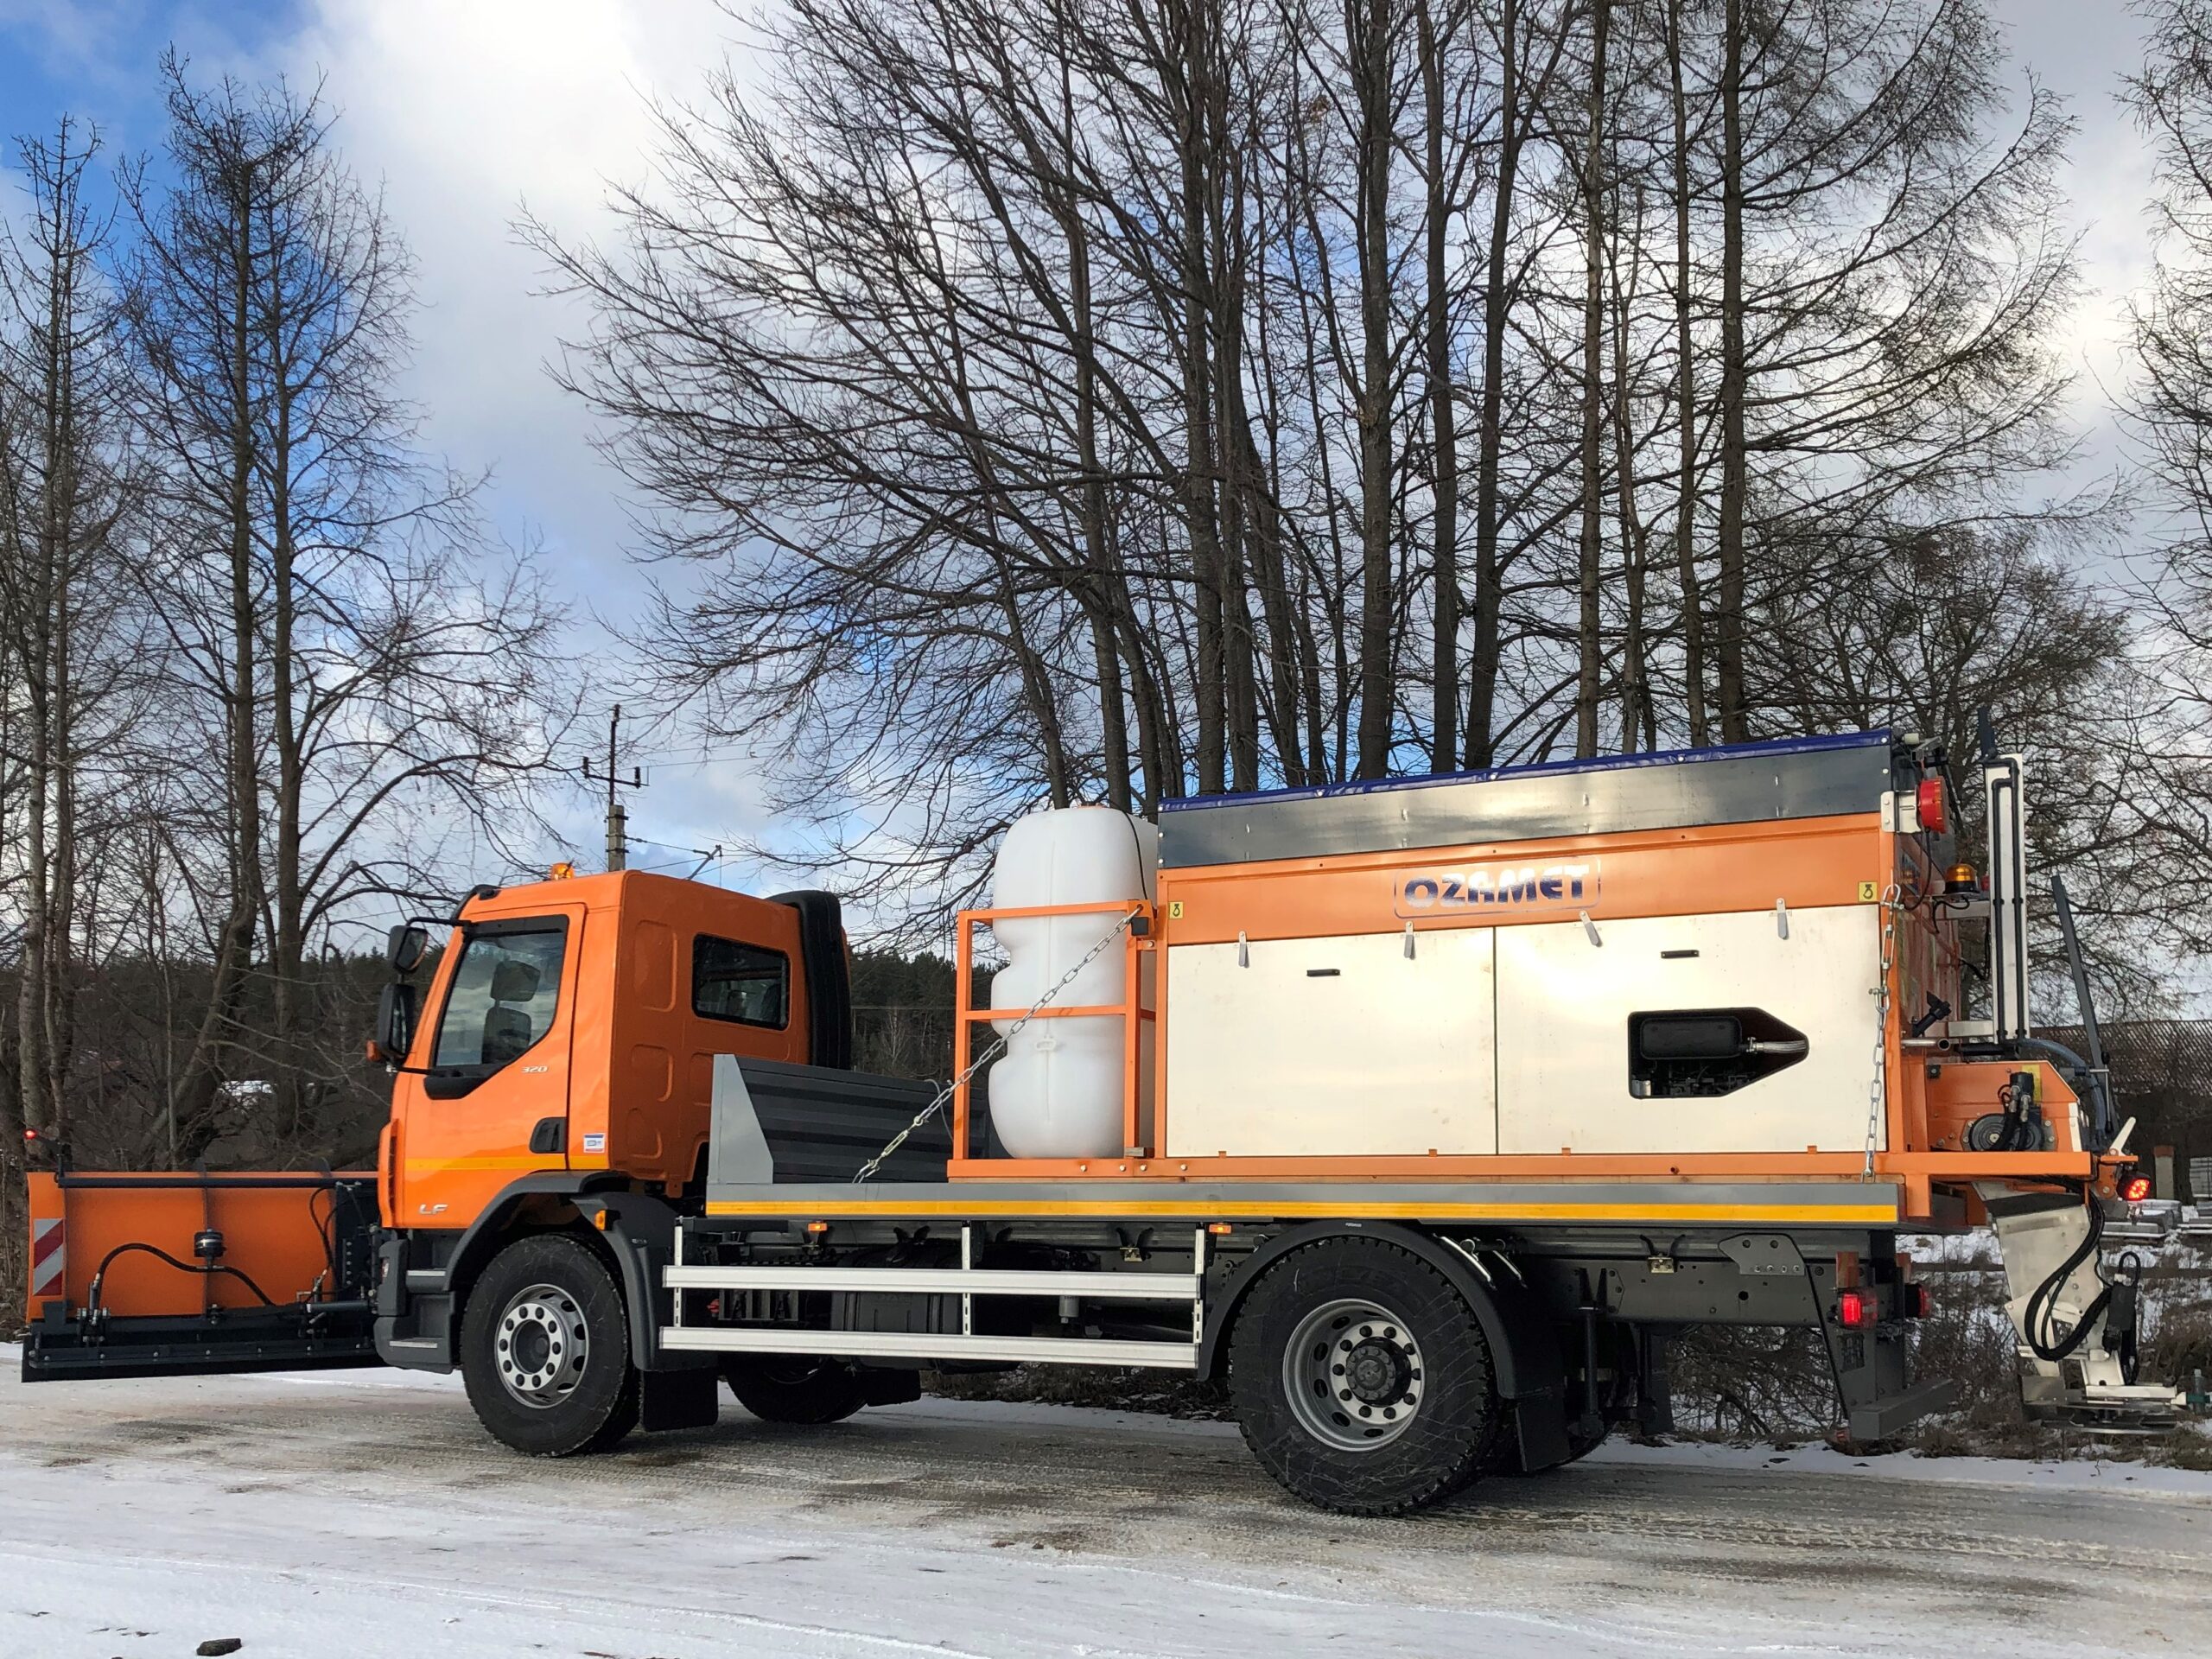 Removing hard pack snow from roads with Ozamet snow plough